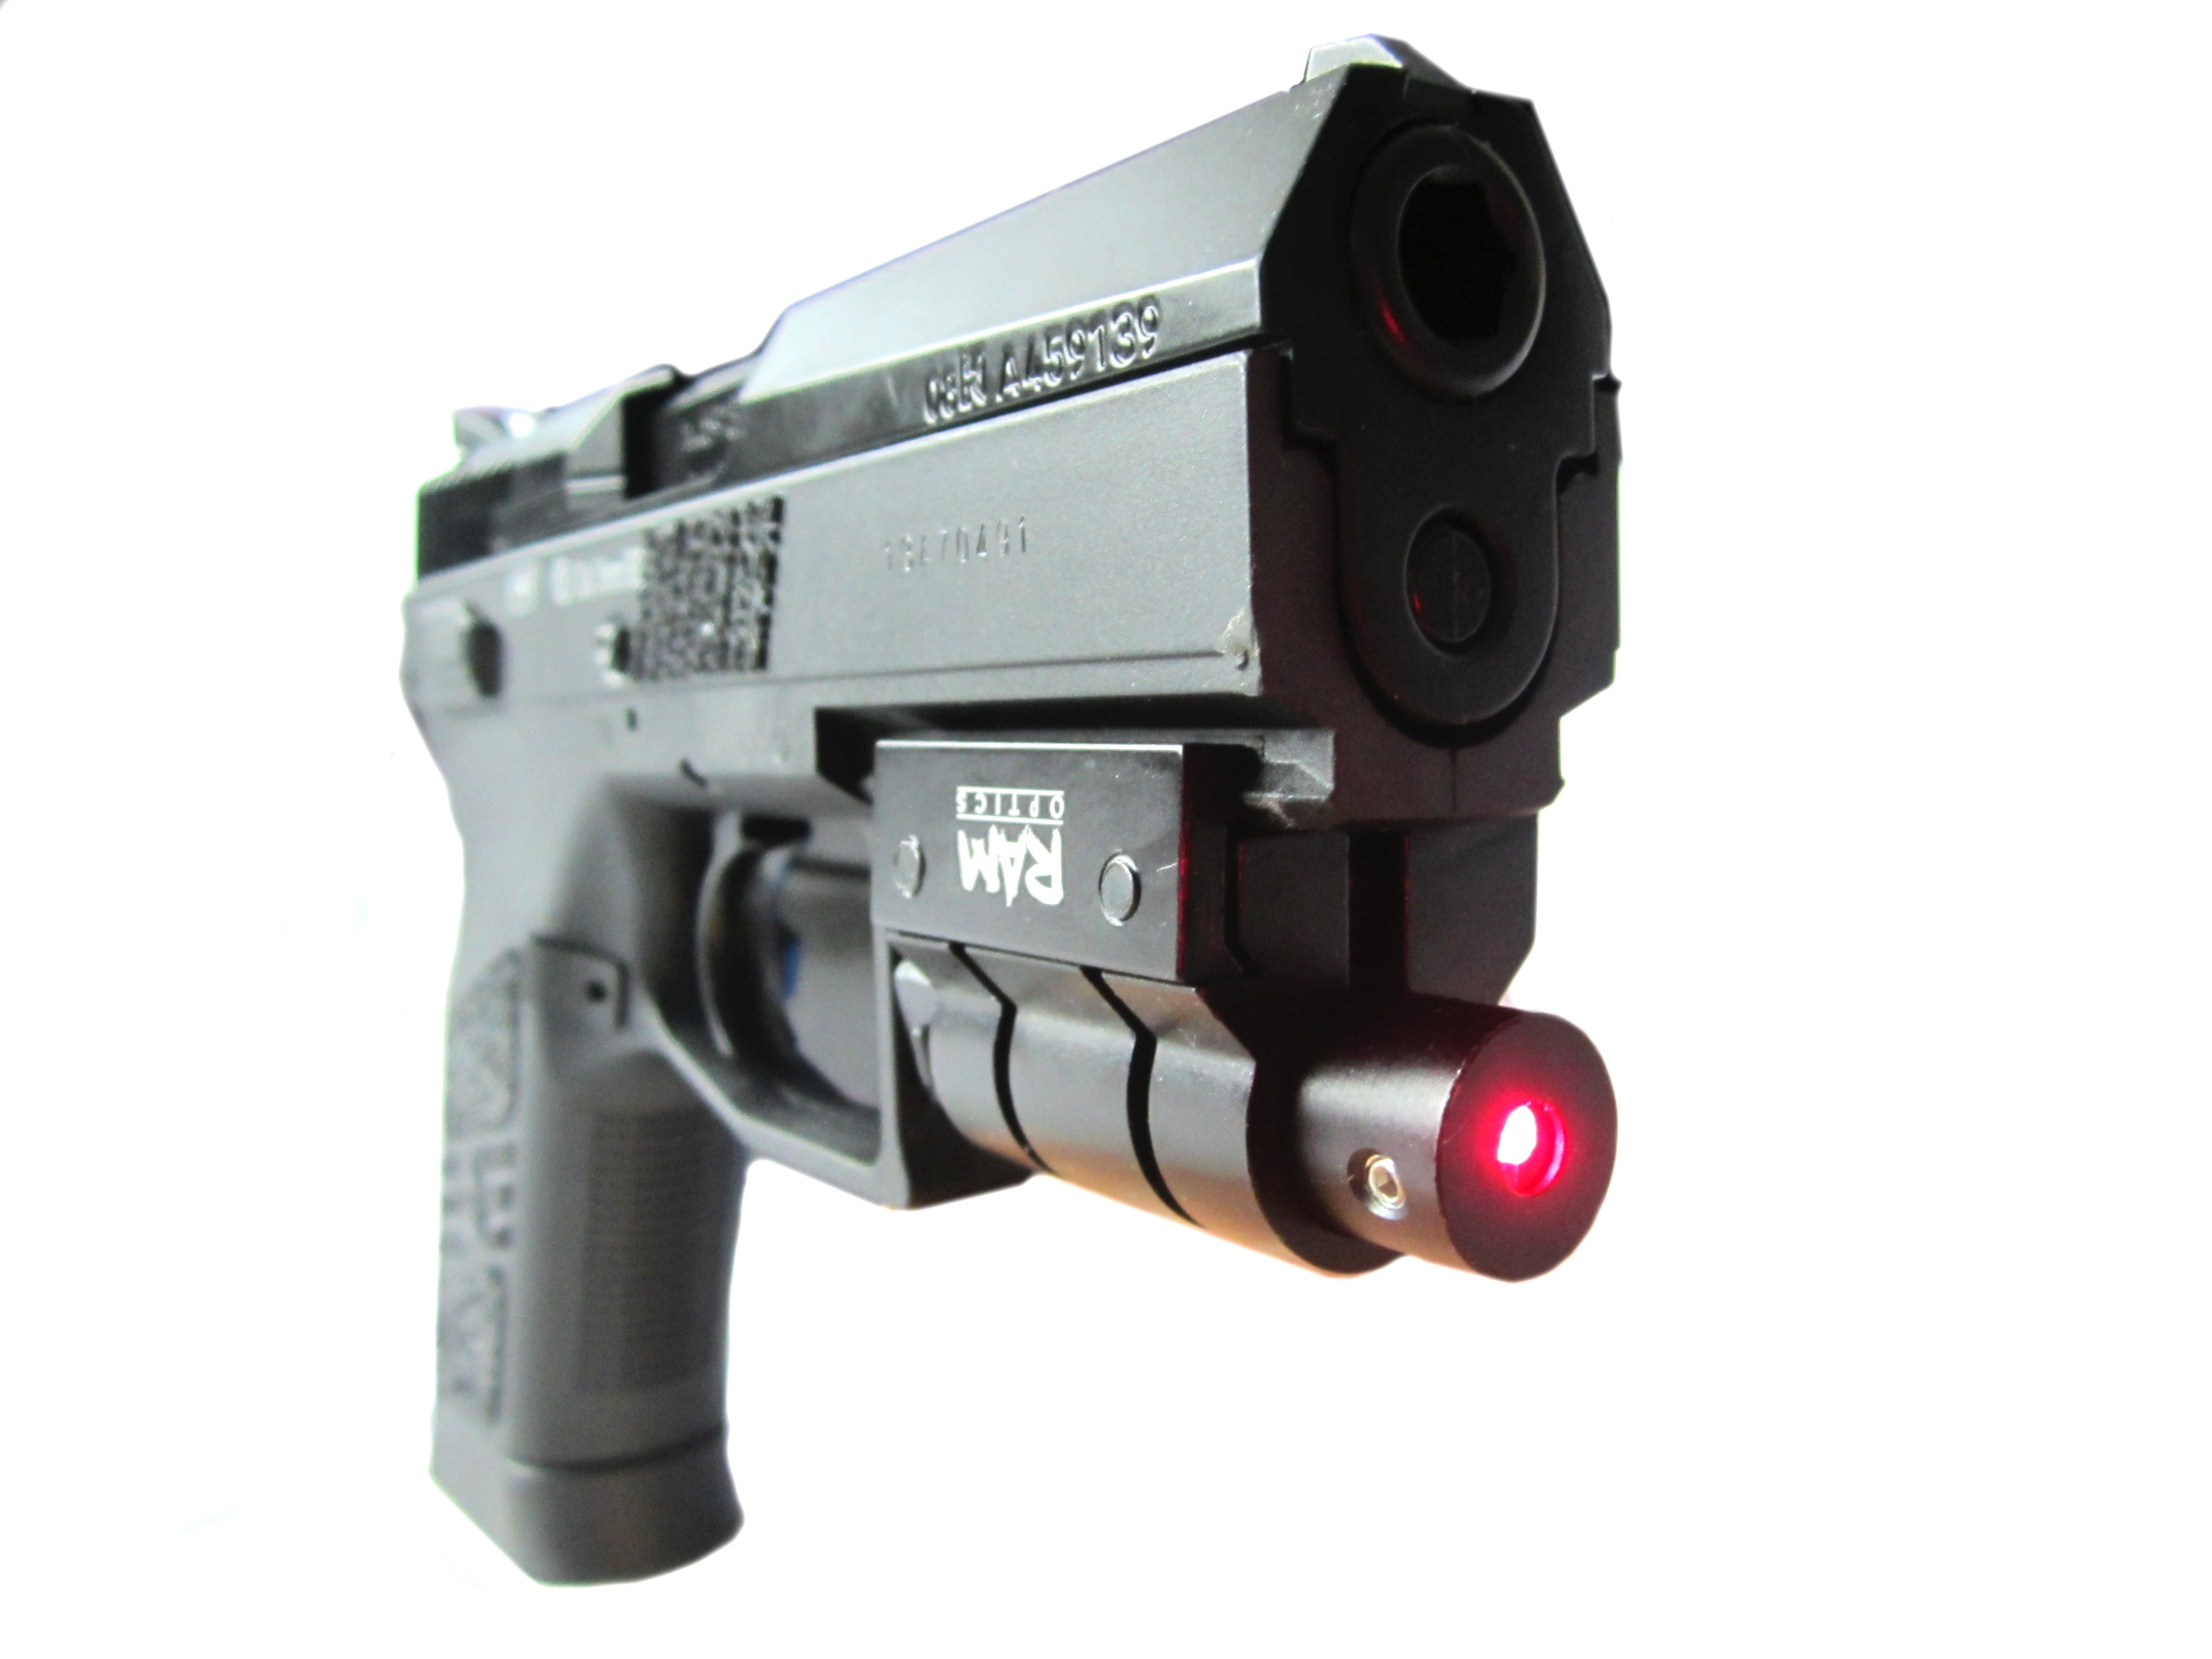 Tactical red laser - Ram